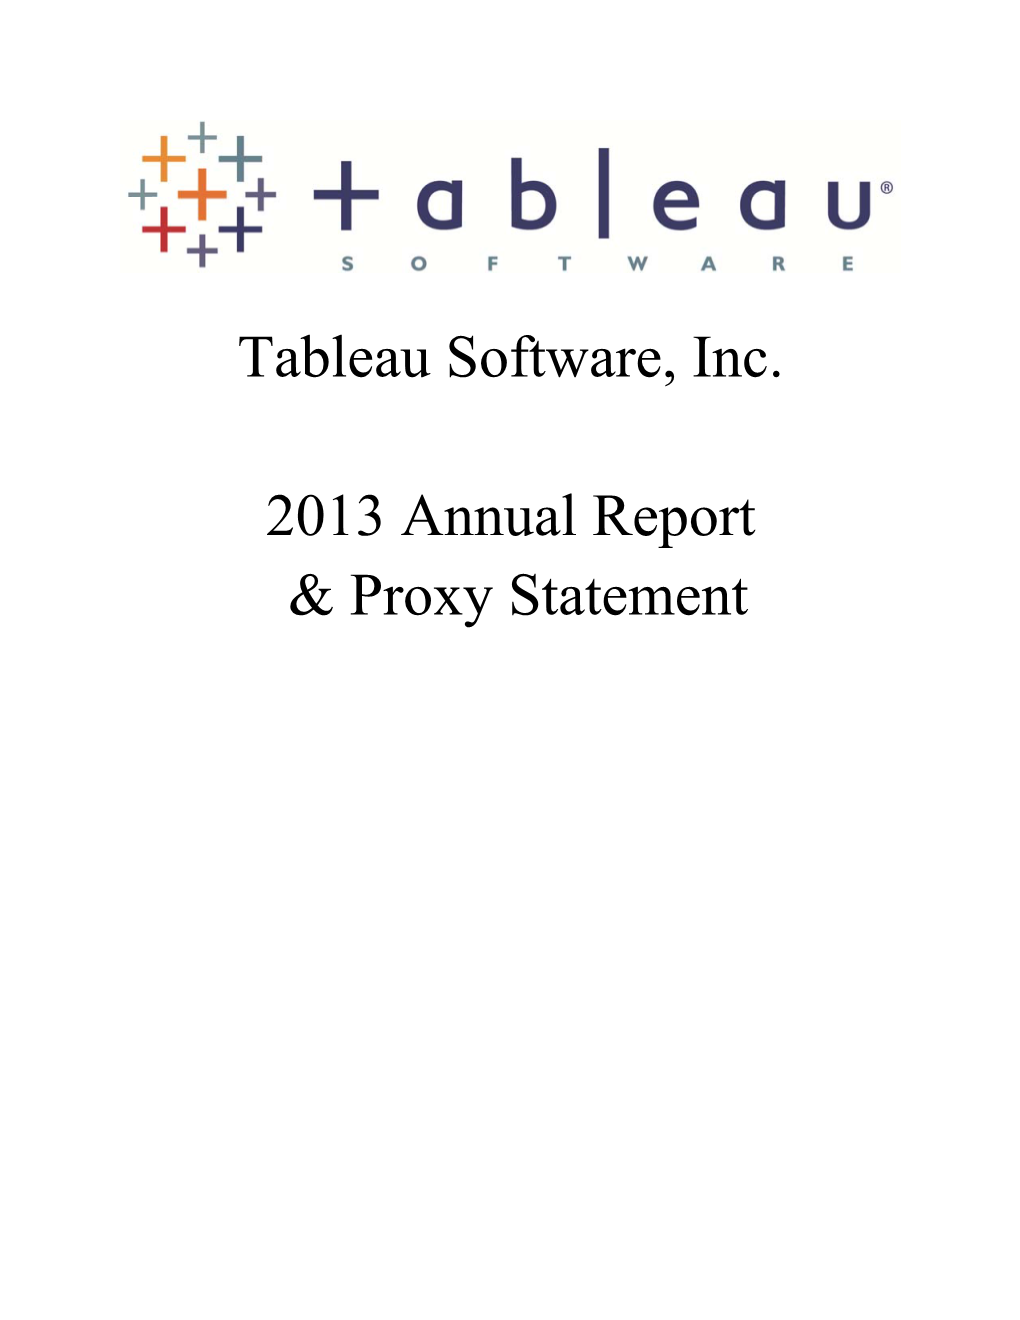 Tableau Software, Inc. 2013 Annual Report & Proxy Statement